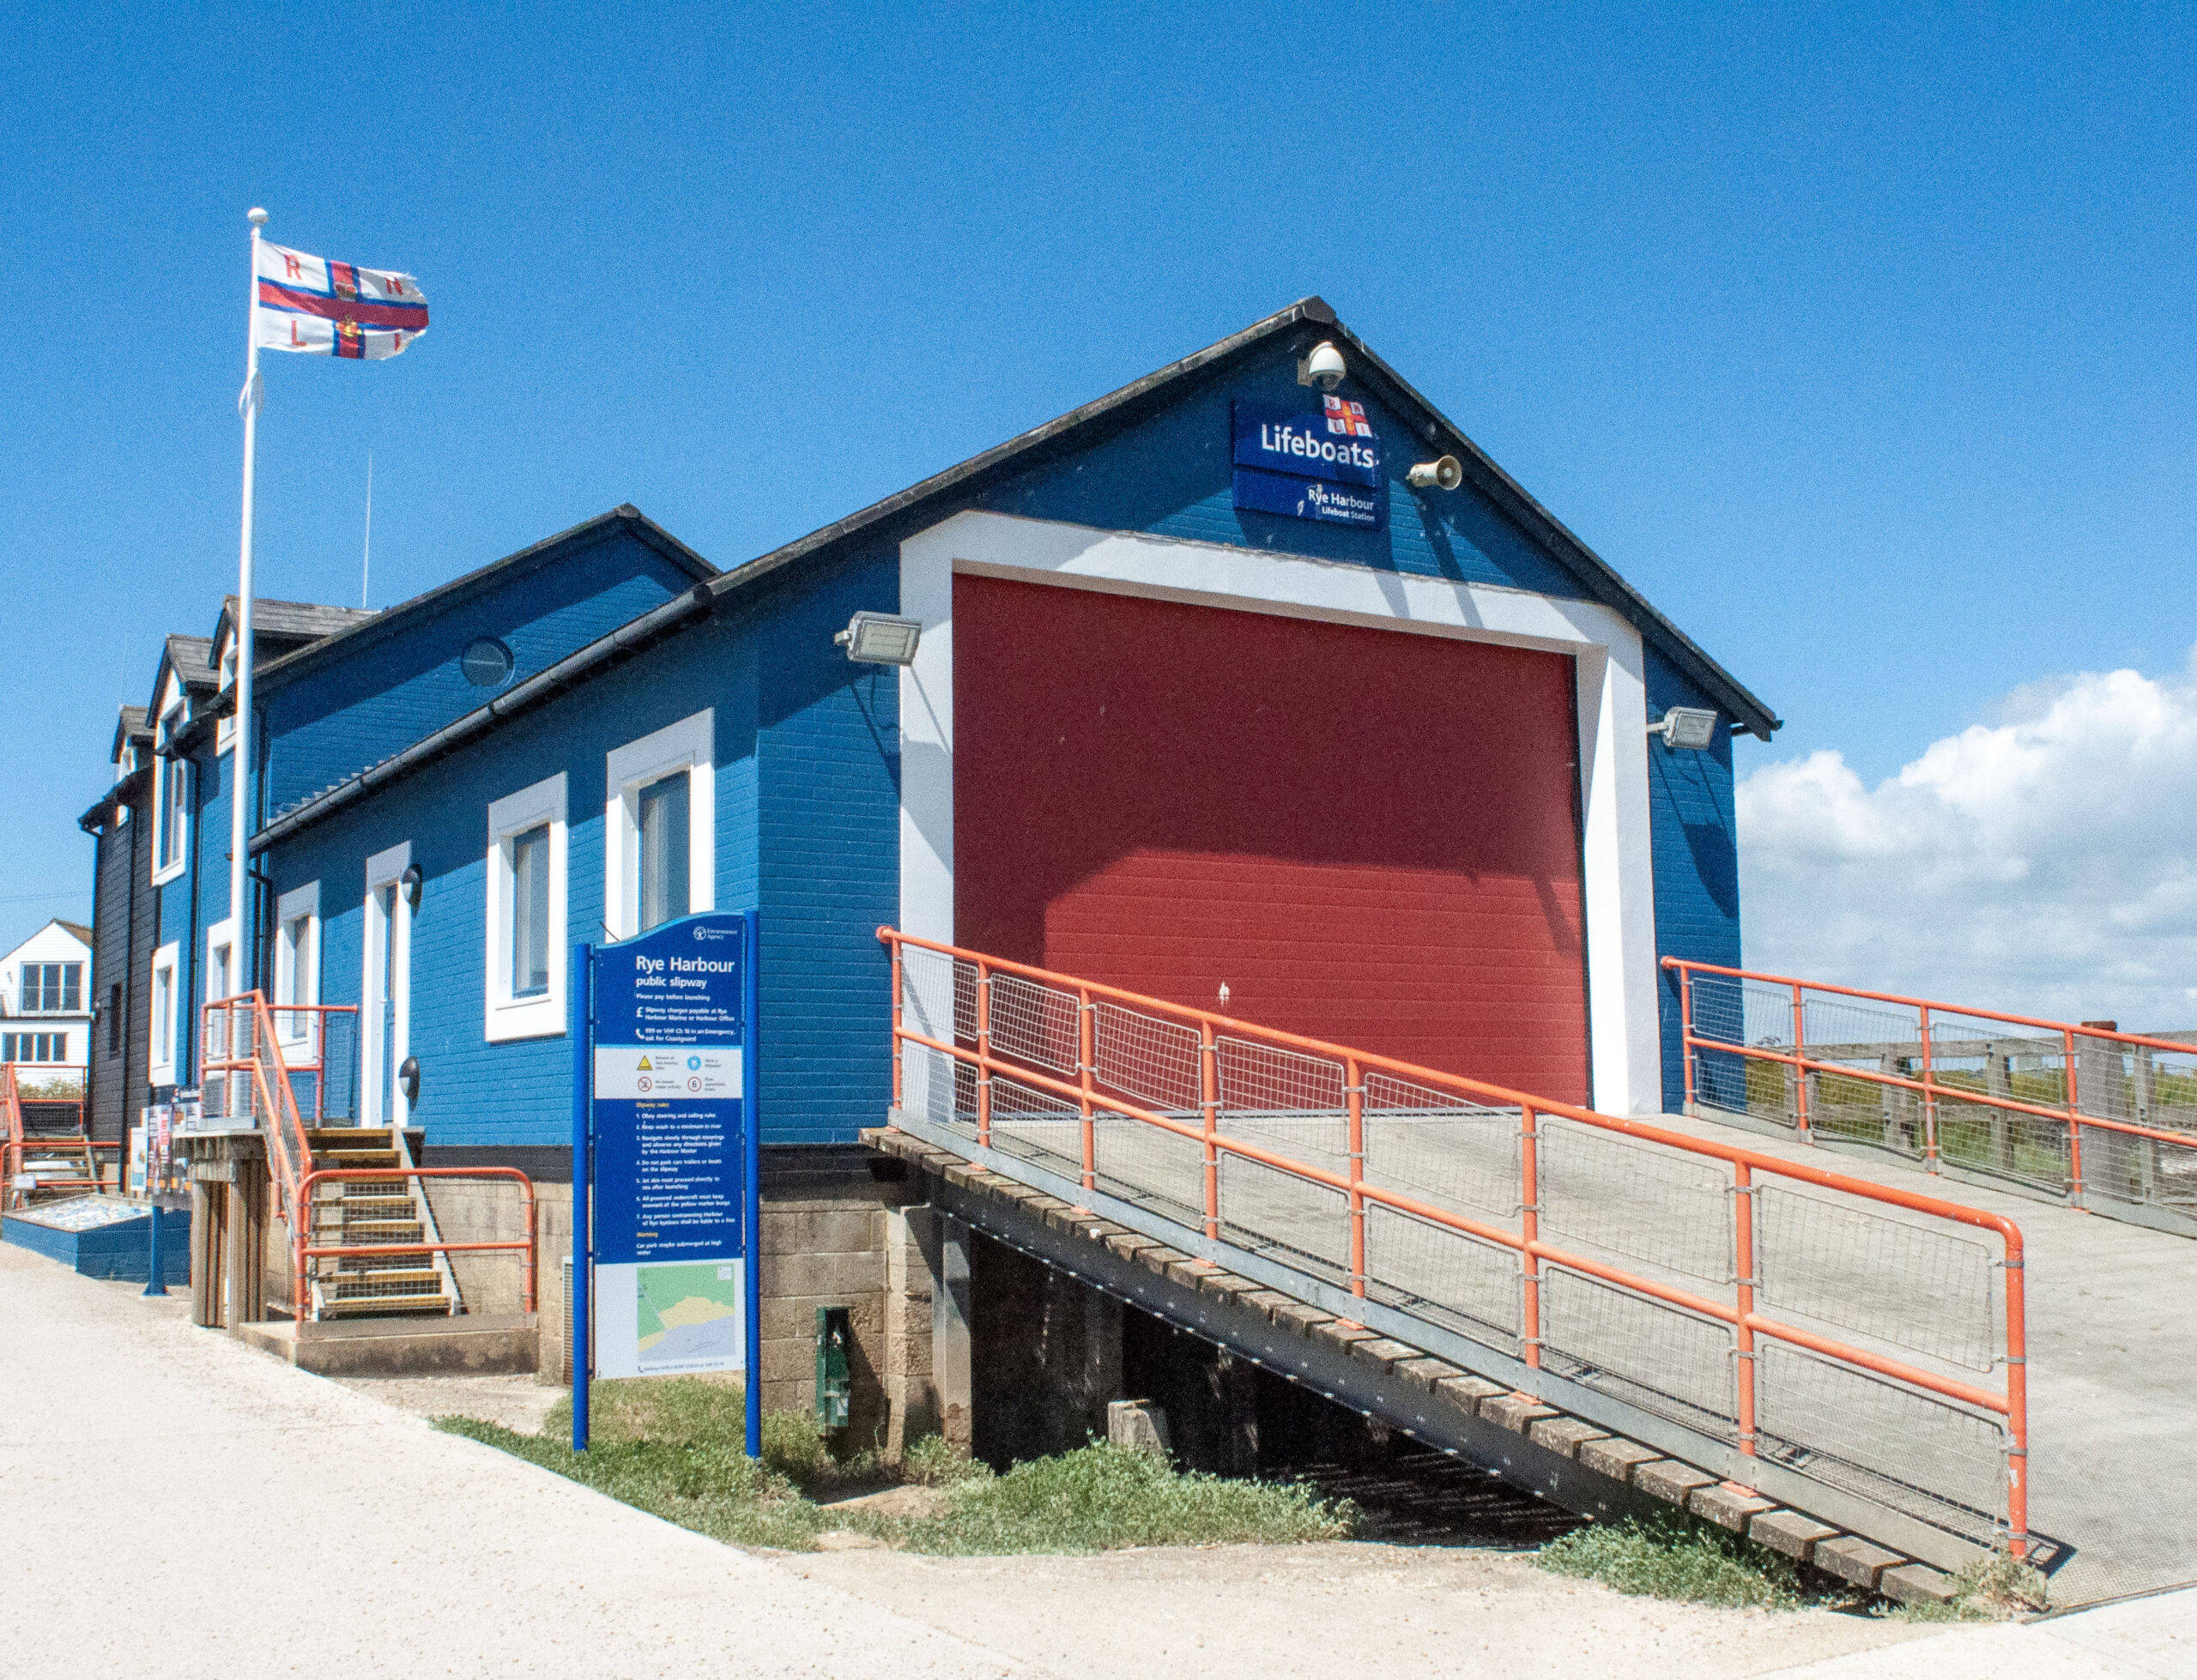 Rye Harbour Lifeboat Station